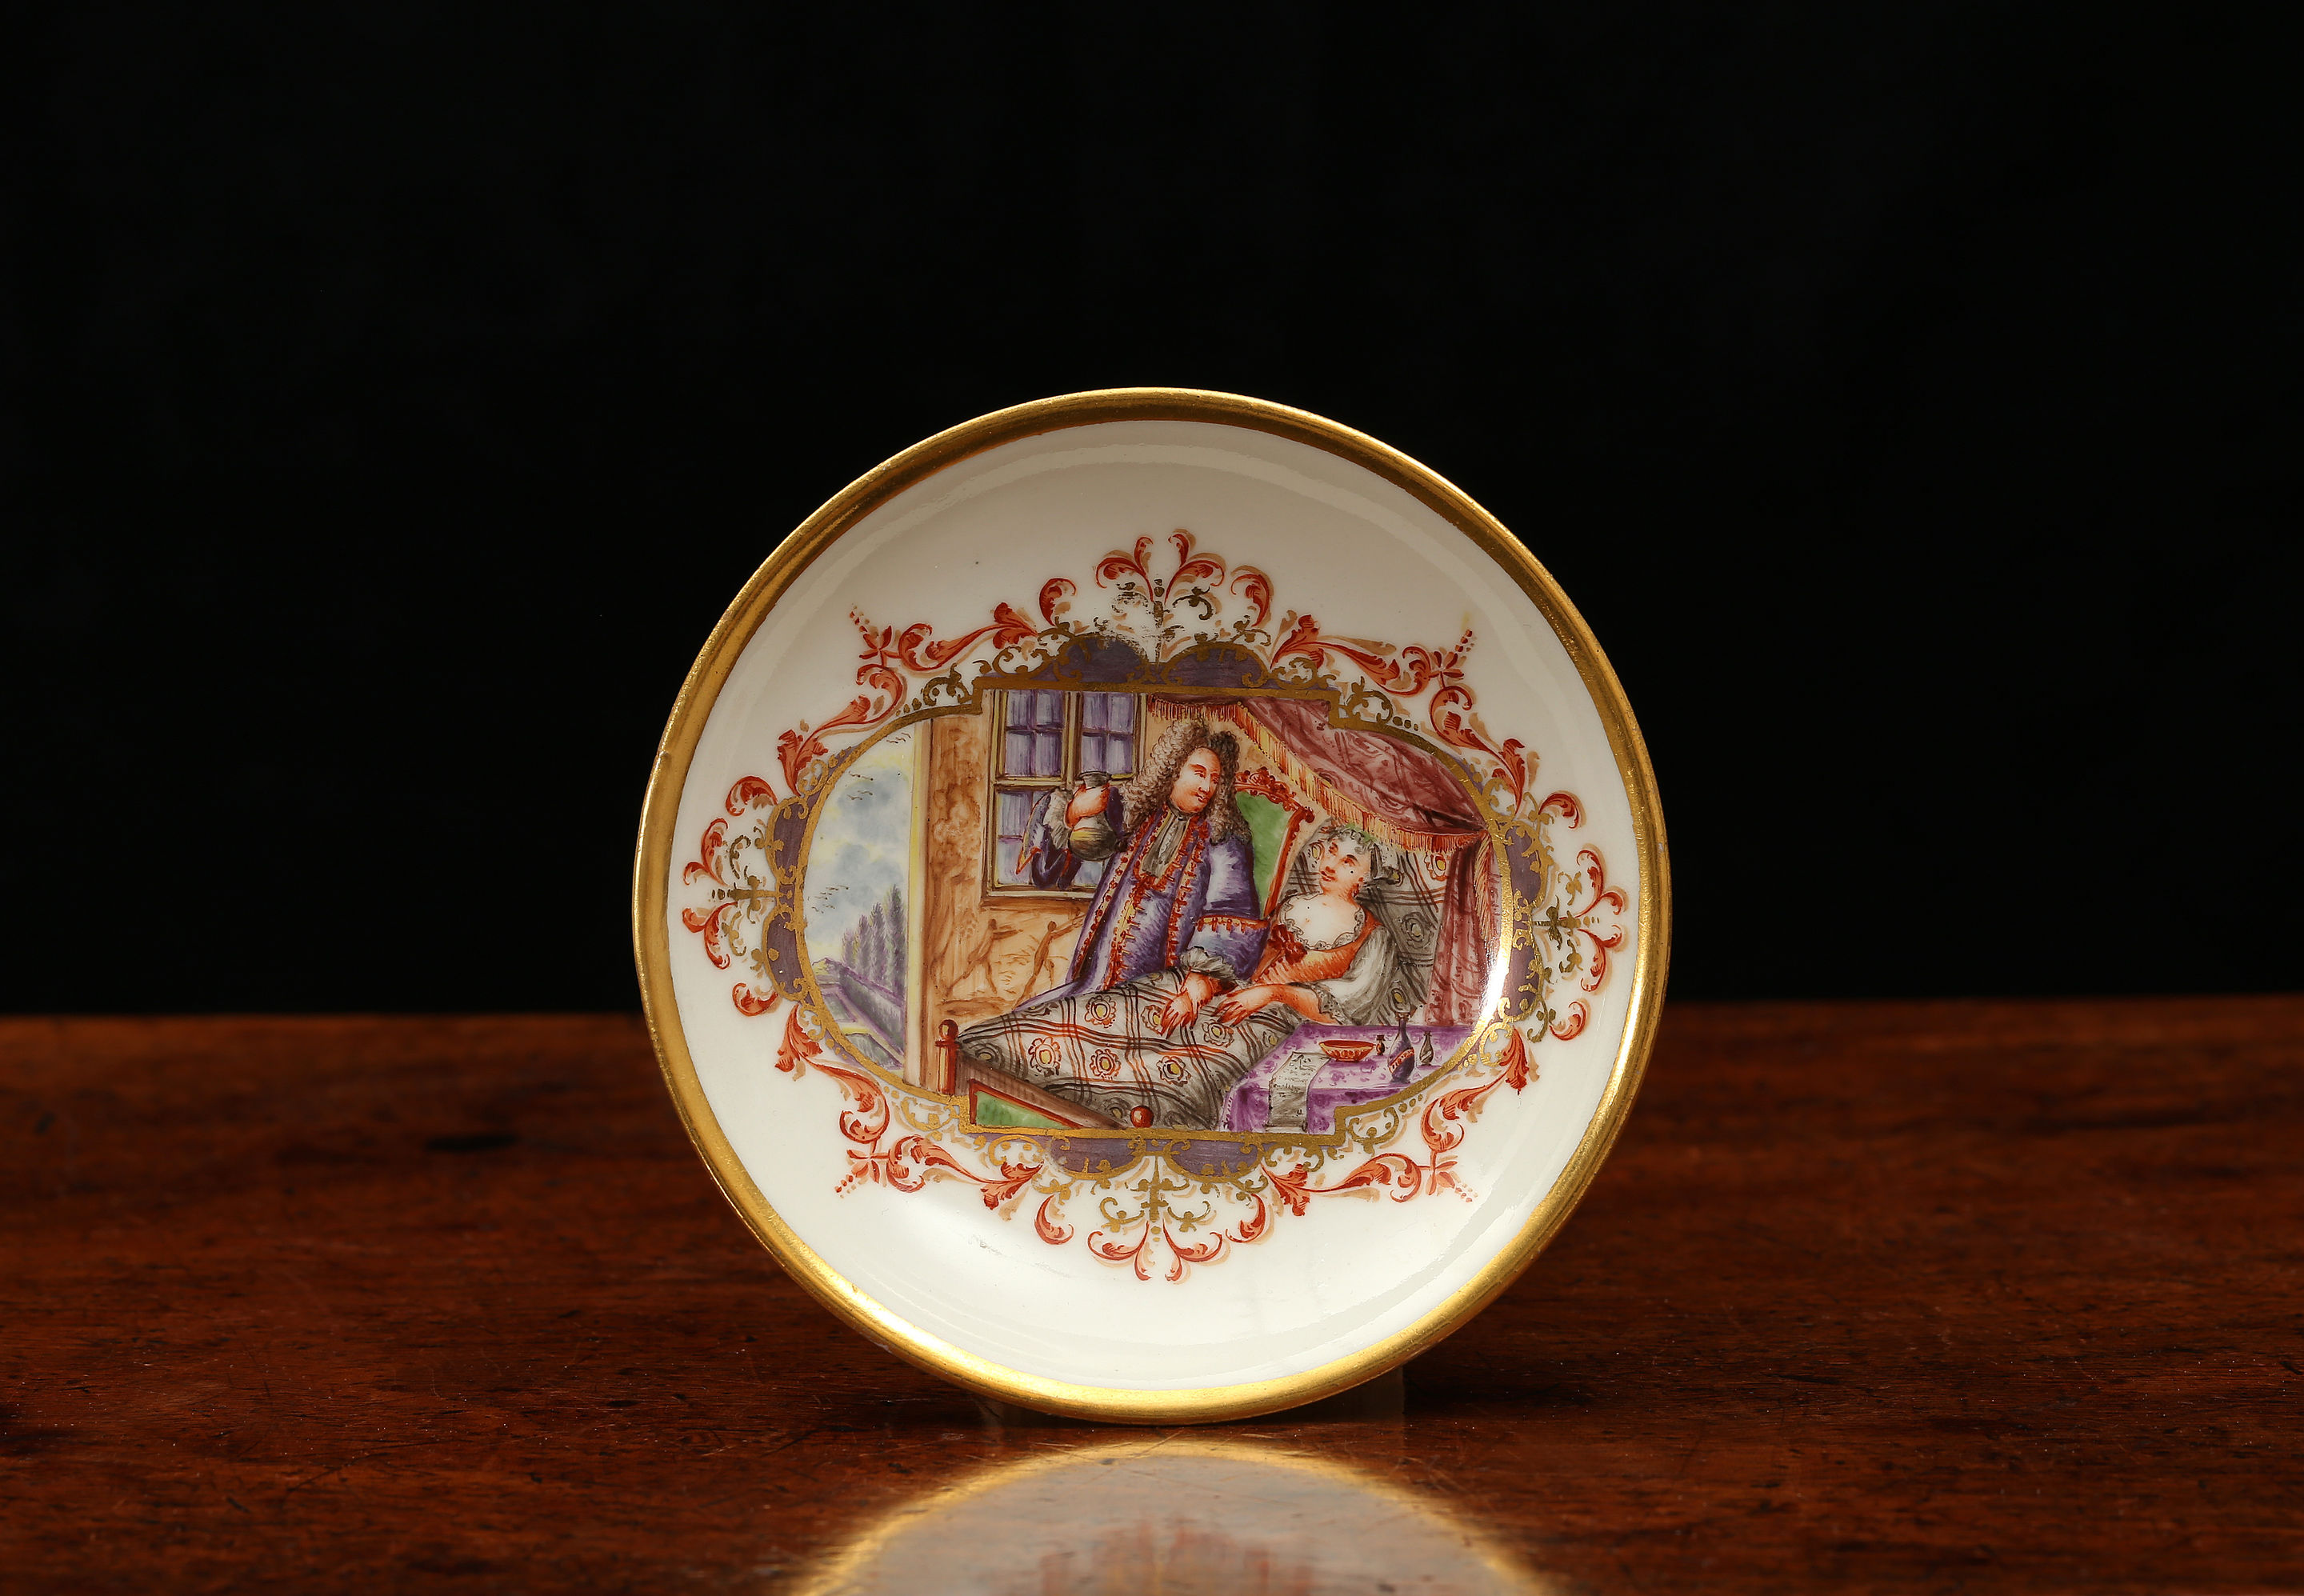 A MEISSEN SAUCER WITH A BEDSIDE SCENE, Probably painted by Johann Gregorius Höroldt